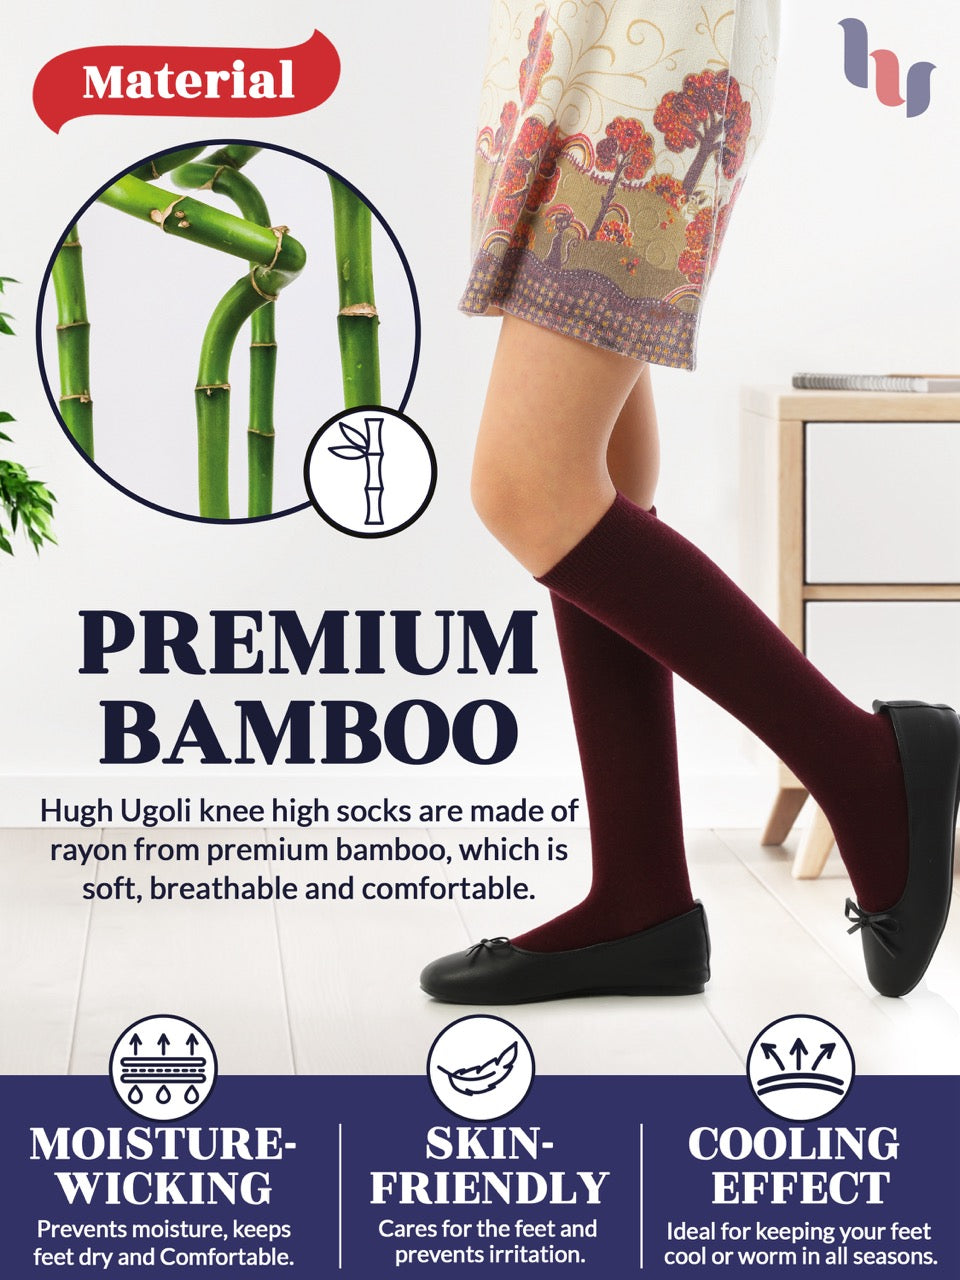 Experience the ultimate comfort and style with Hugh Ugoli Kids Bamboo School Socks. These burgundy socks perfect for school or everyday wear, our high-quality knee-high socks meet uniform standards while reducing blisters and staying in place. Available in four sizes for children aged 3-14 years